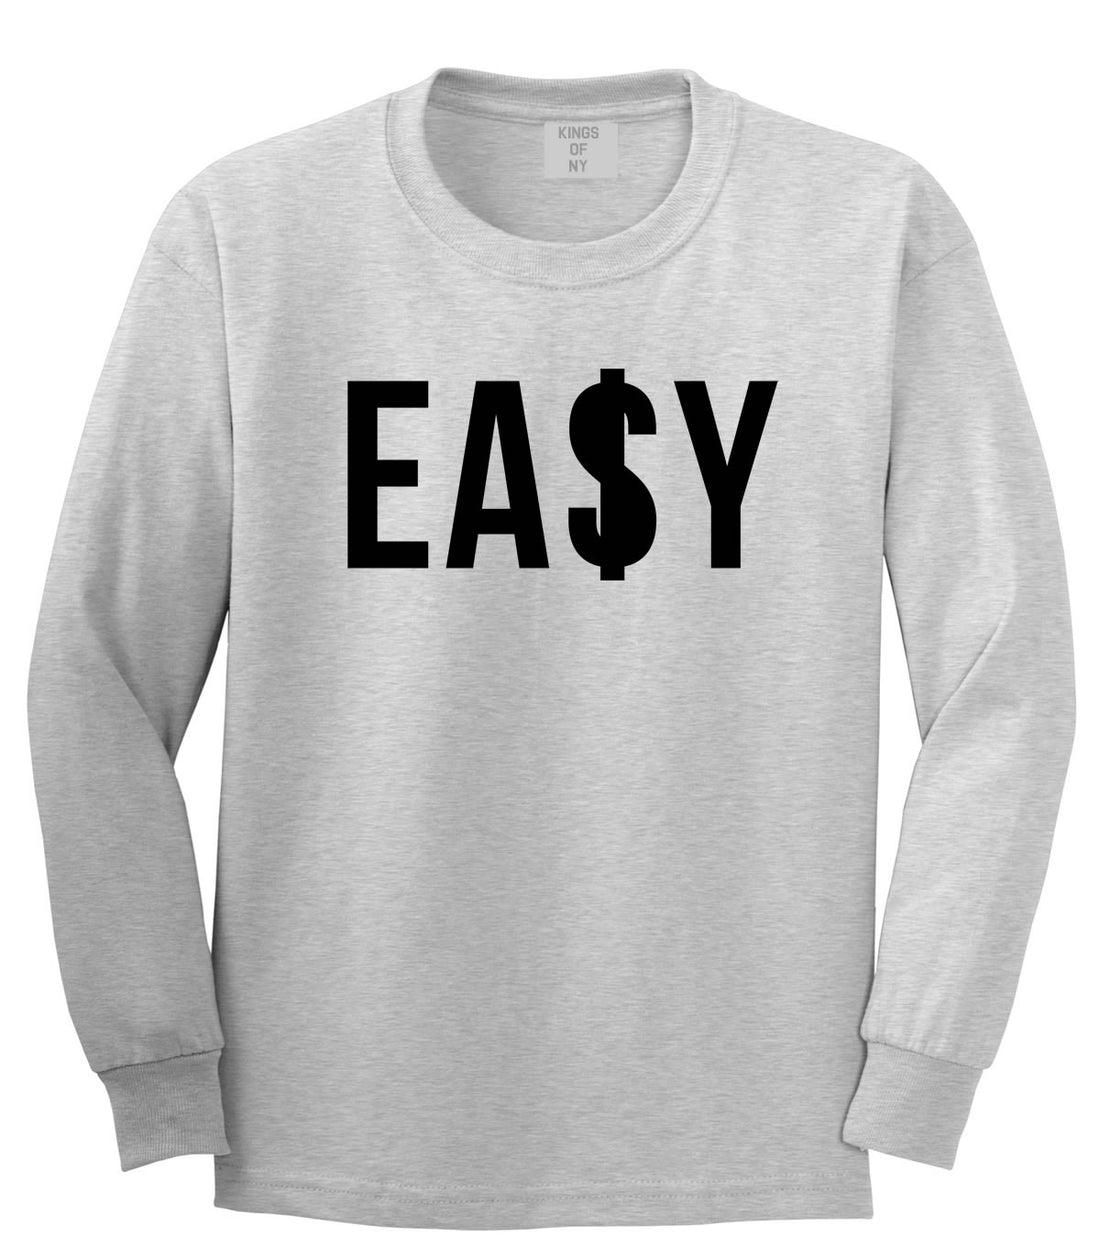 Easy Money Big High Dope Cool Black by Kings Of NY Long Sleeve Boys Kids T-Shirt In Grey by Kings Of NY